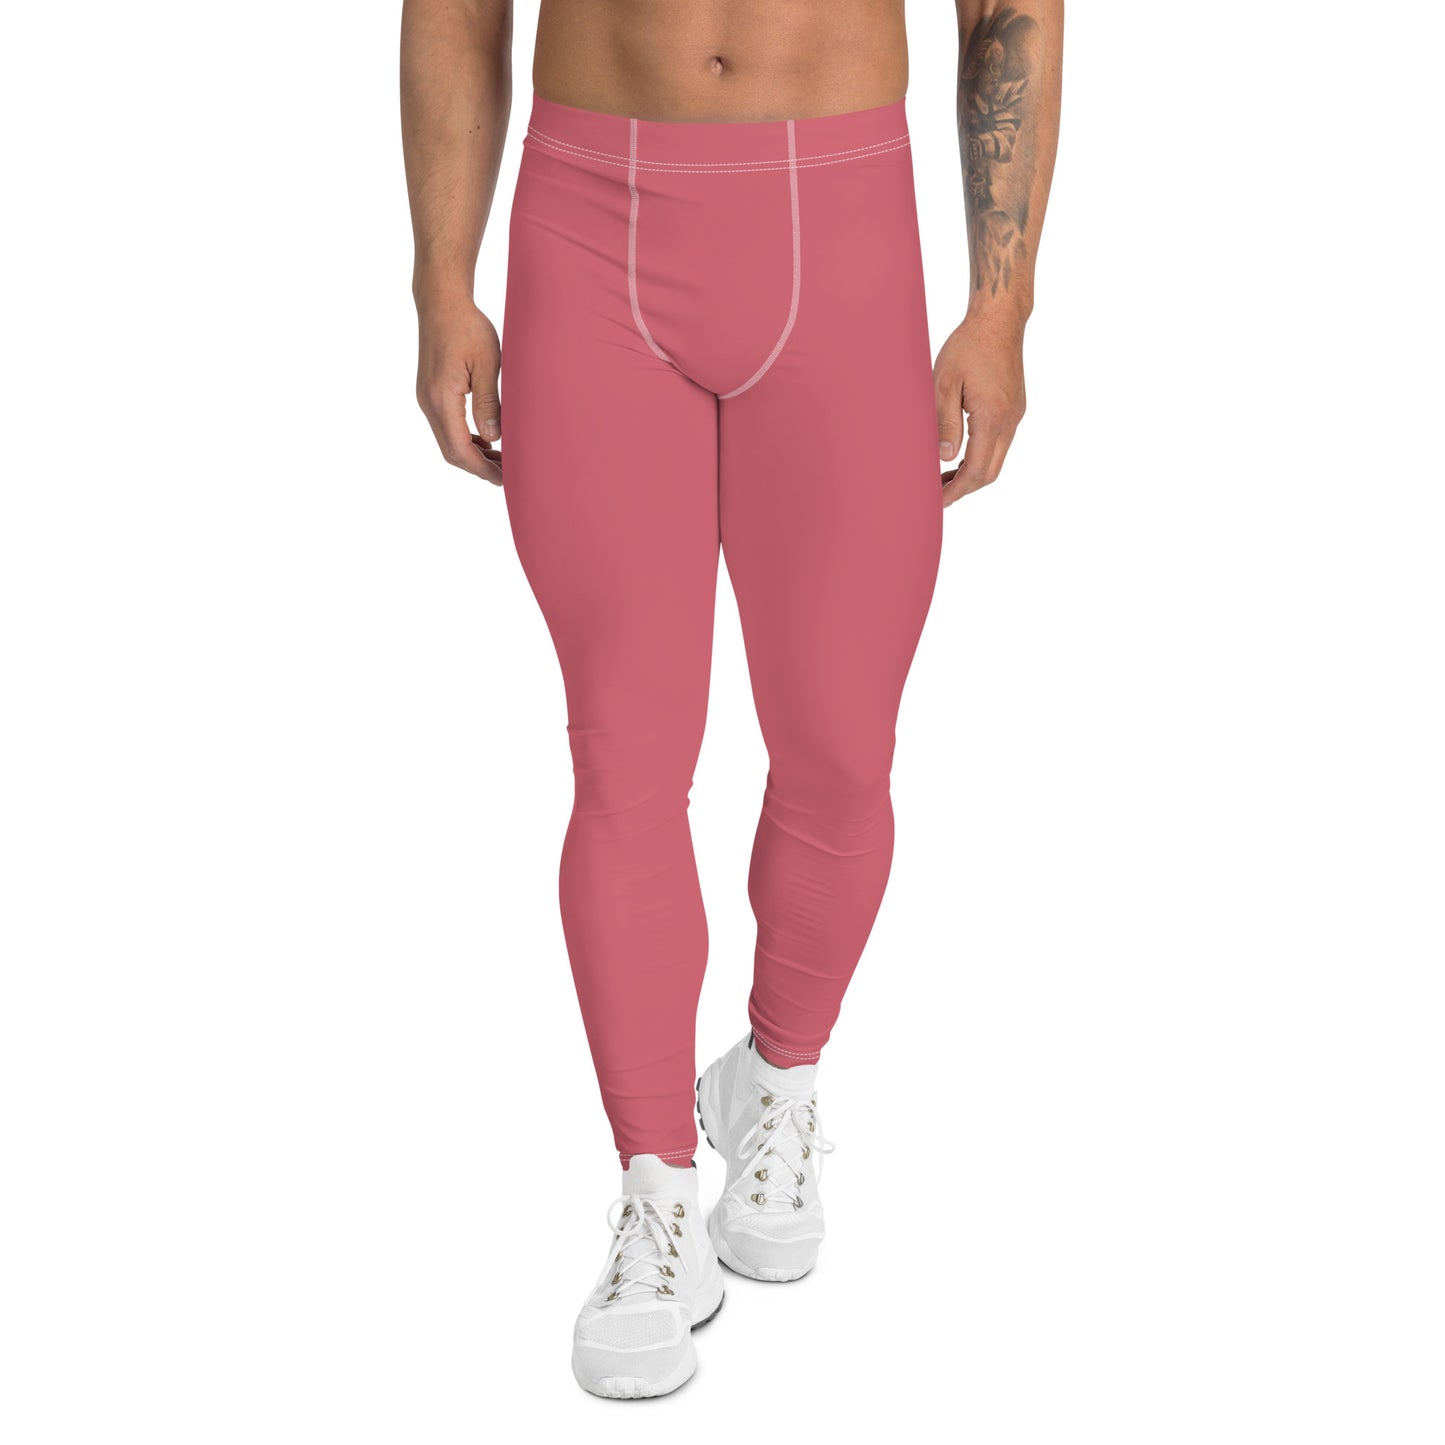 humble sportswear, men's color match compression activewear performance leggings, pink